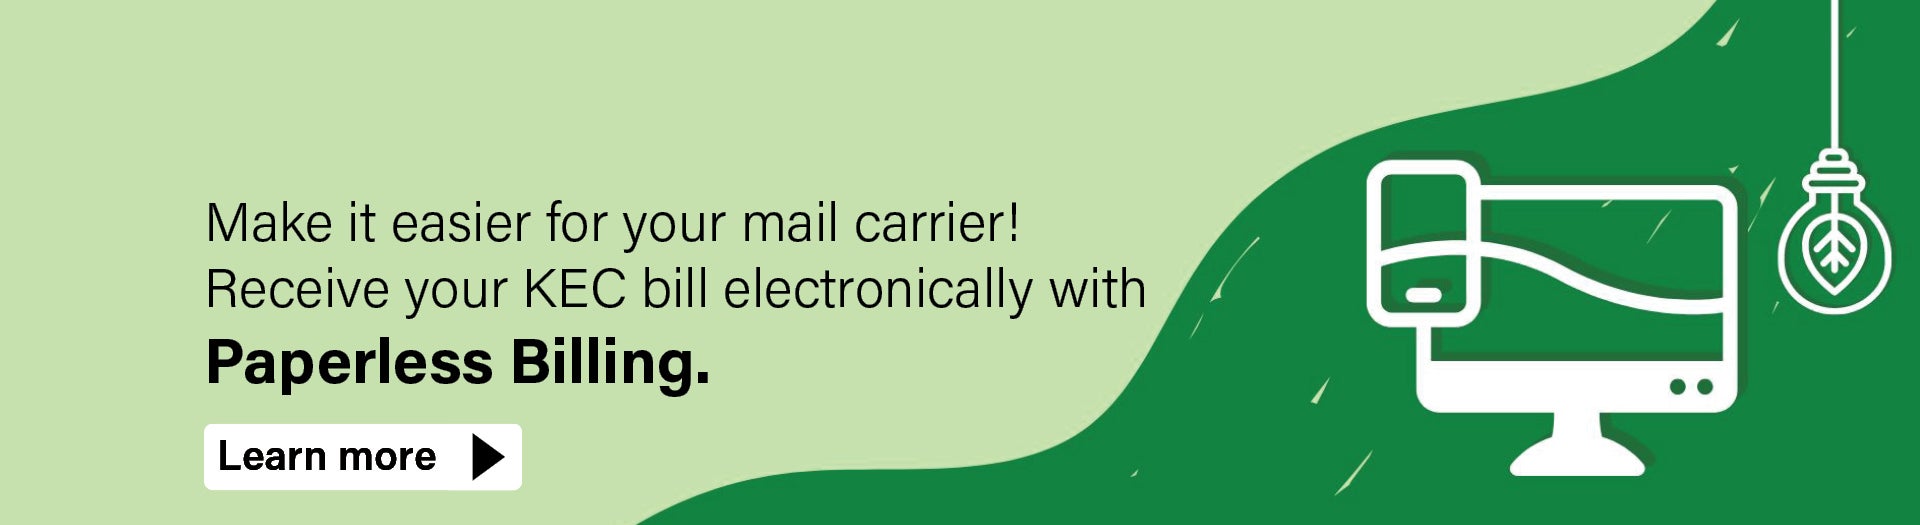 Make it easier for your mail carrier!  Receive your KEC bill electronically with Paperless Billing. Learn More.